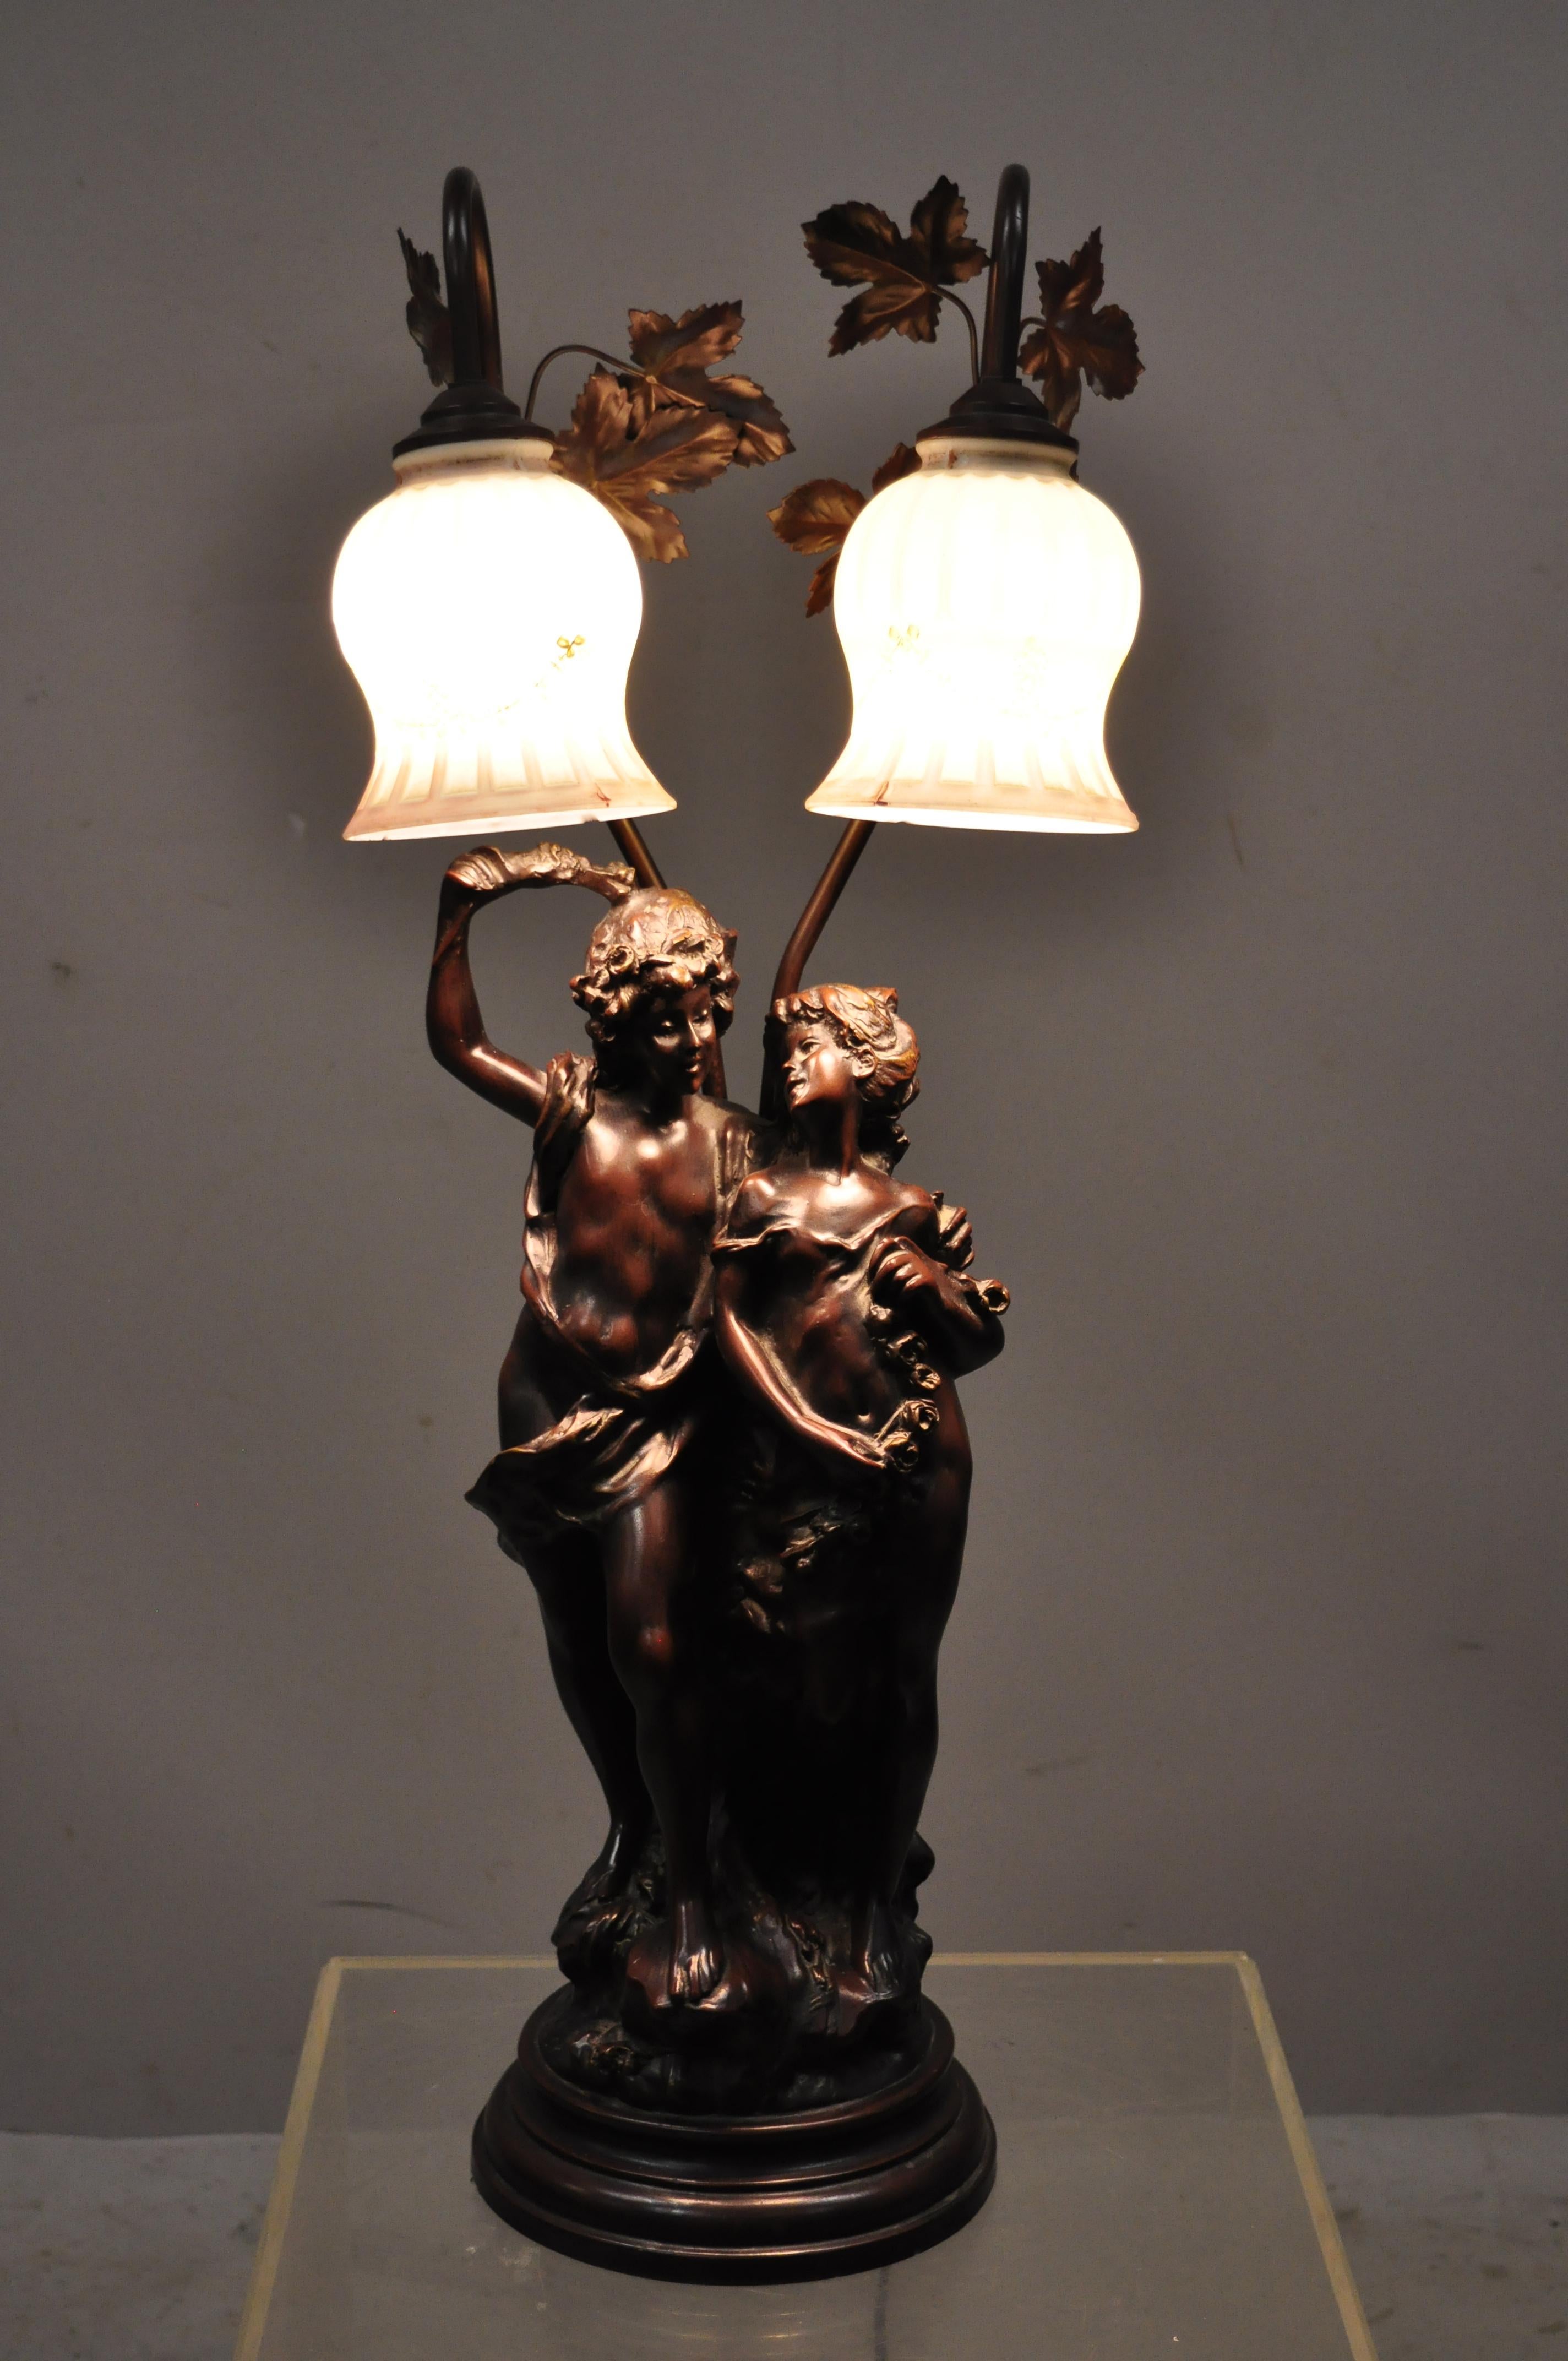 Victorian Art Nouveau French style twin figural male and female metal parlor table lamp. Item features 2 glass floral paint decorated shades, twin male and female figures with remarkable detail, very nice item, great style and form. Believed to be a